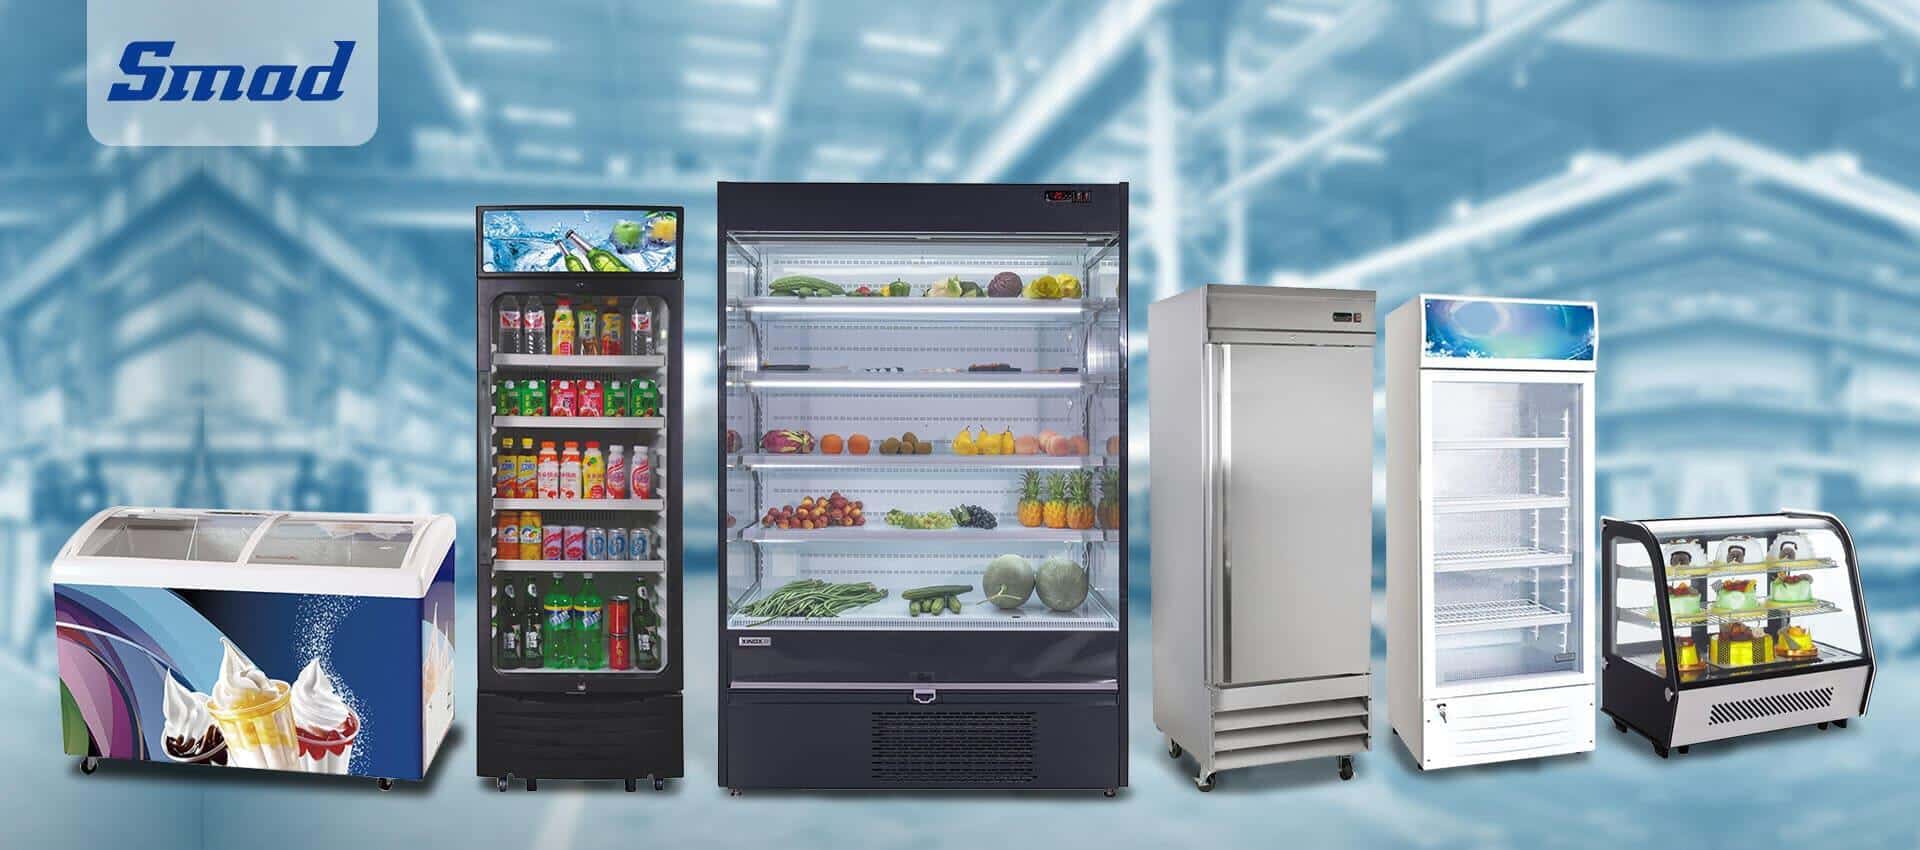 Amazon.com: TECHTONGDA Display Refrigerators Cake Showcase Curved Cooling  Display Case Commercial Bakery Cabinet with LED Light Floor Standing 220V  Rear Door : Industrial & Scientific